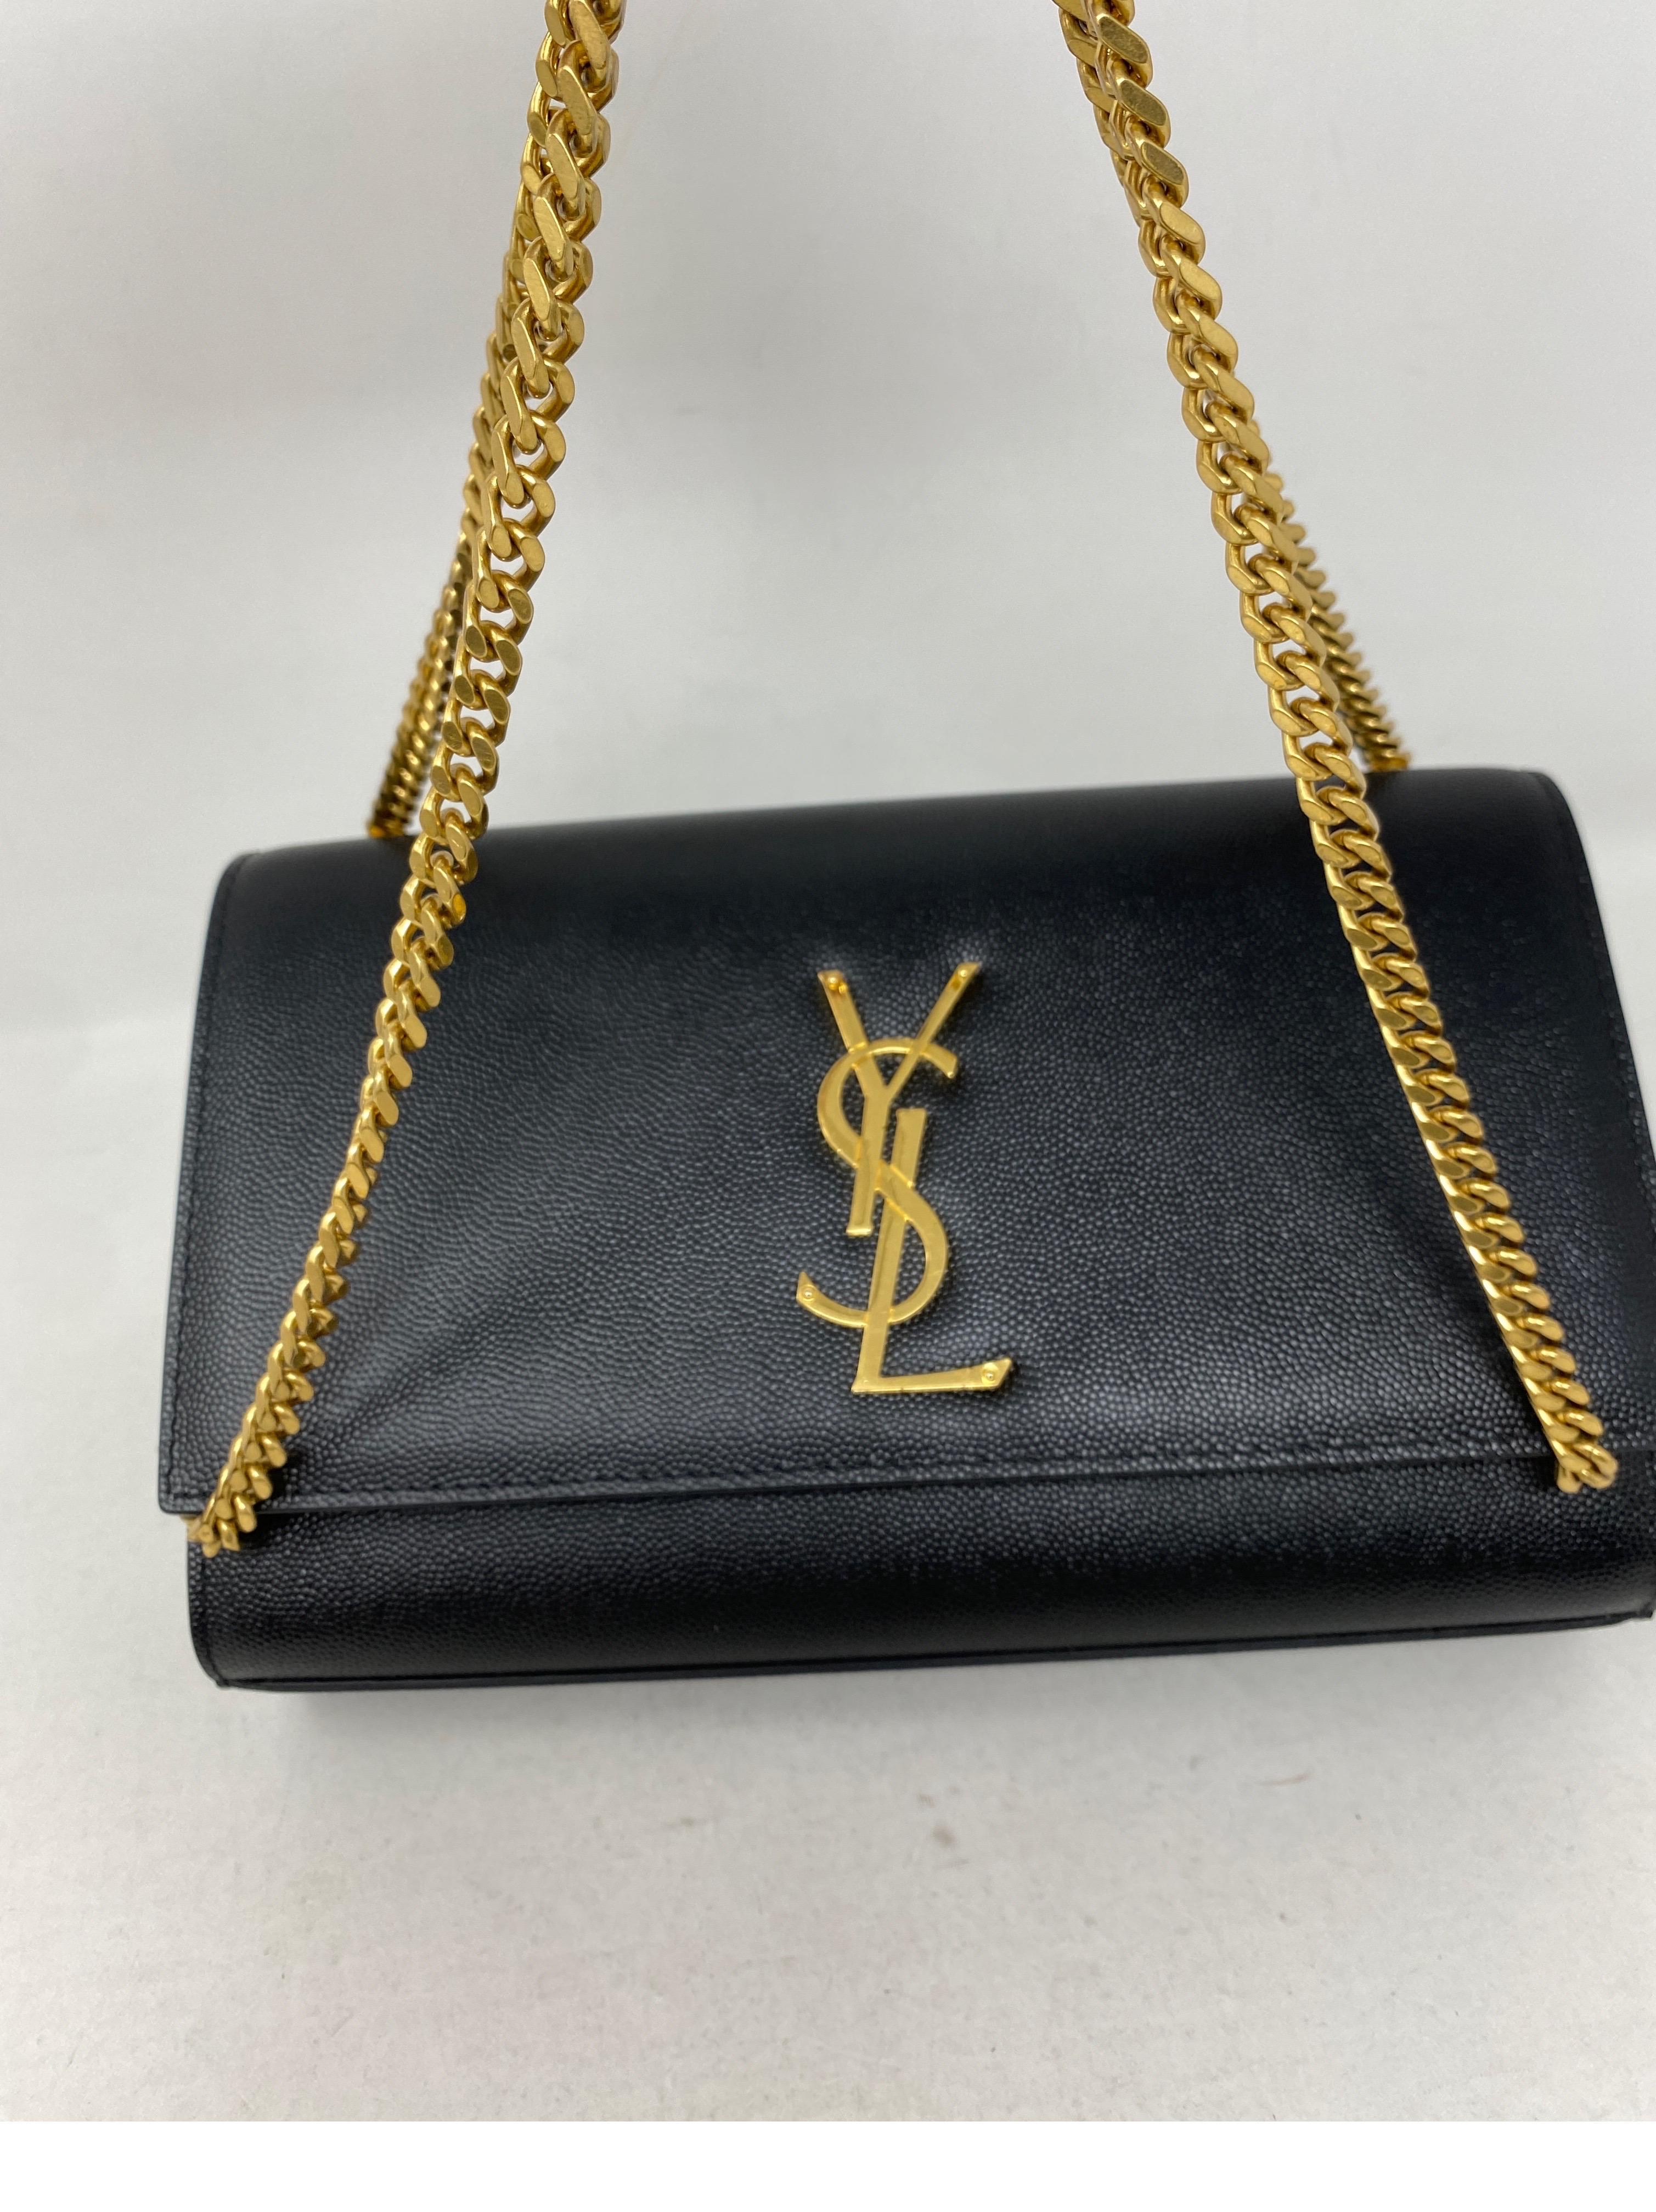 Yves Saint Laurent Black Crossbody Bag. Gold hardware. Black leather purse can be worn longer as a crossbody bag or doubled as a shoulder bag. Also can be tucked in as a clutch. Excellent like new condition. Classic style by YSL. Includes dust